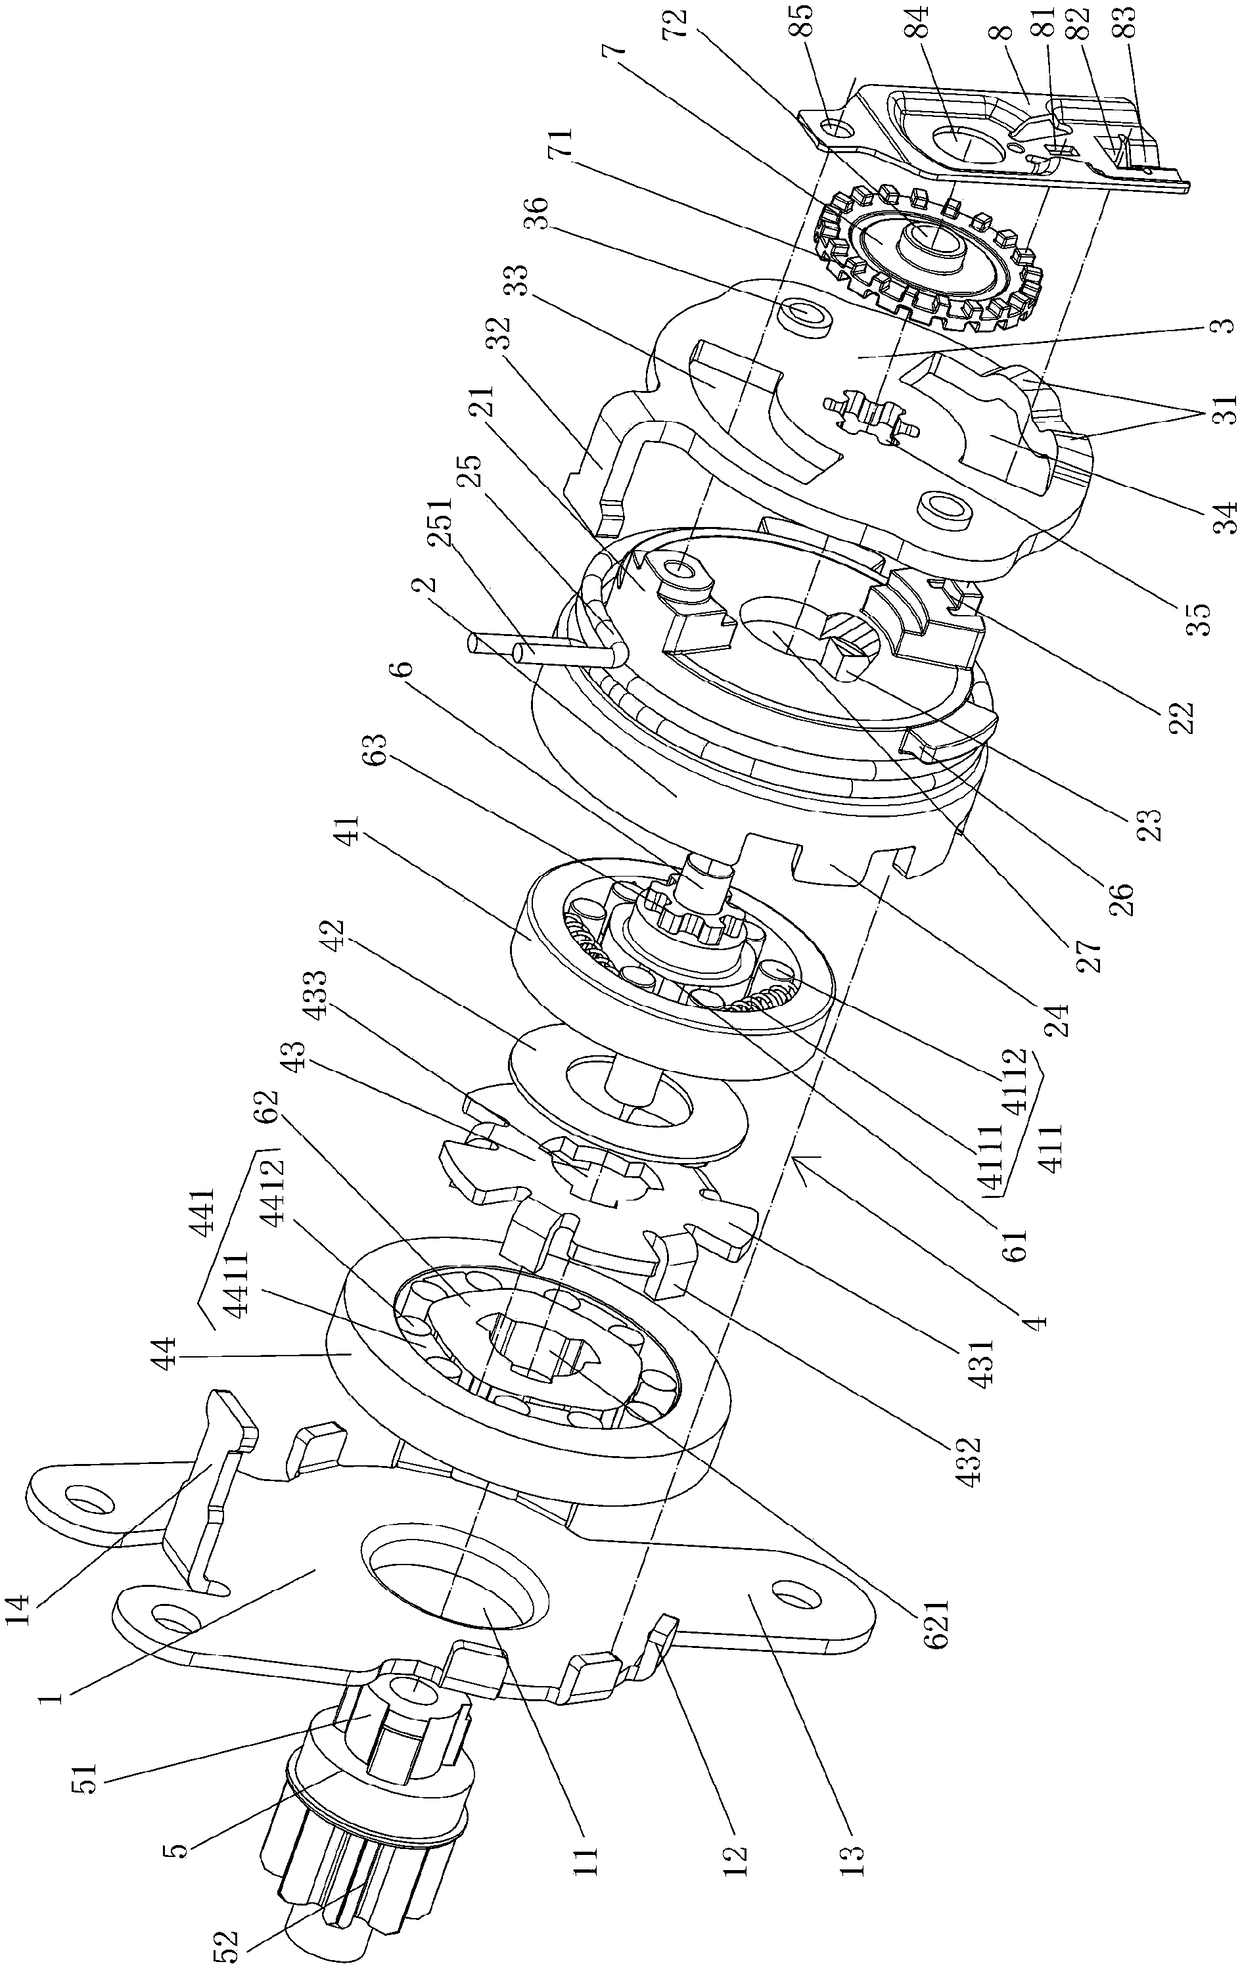 Height regulating device for automobile chair